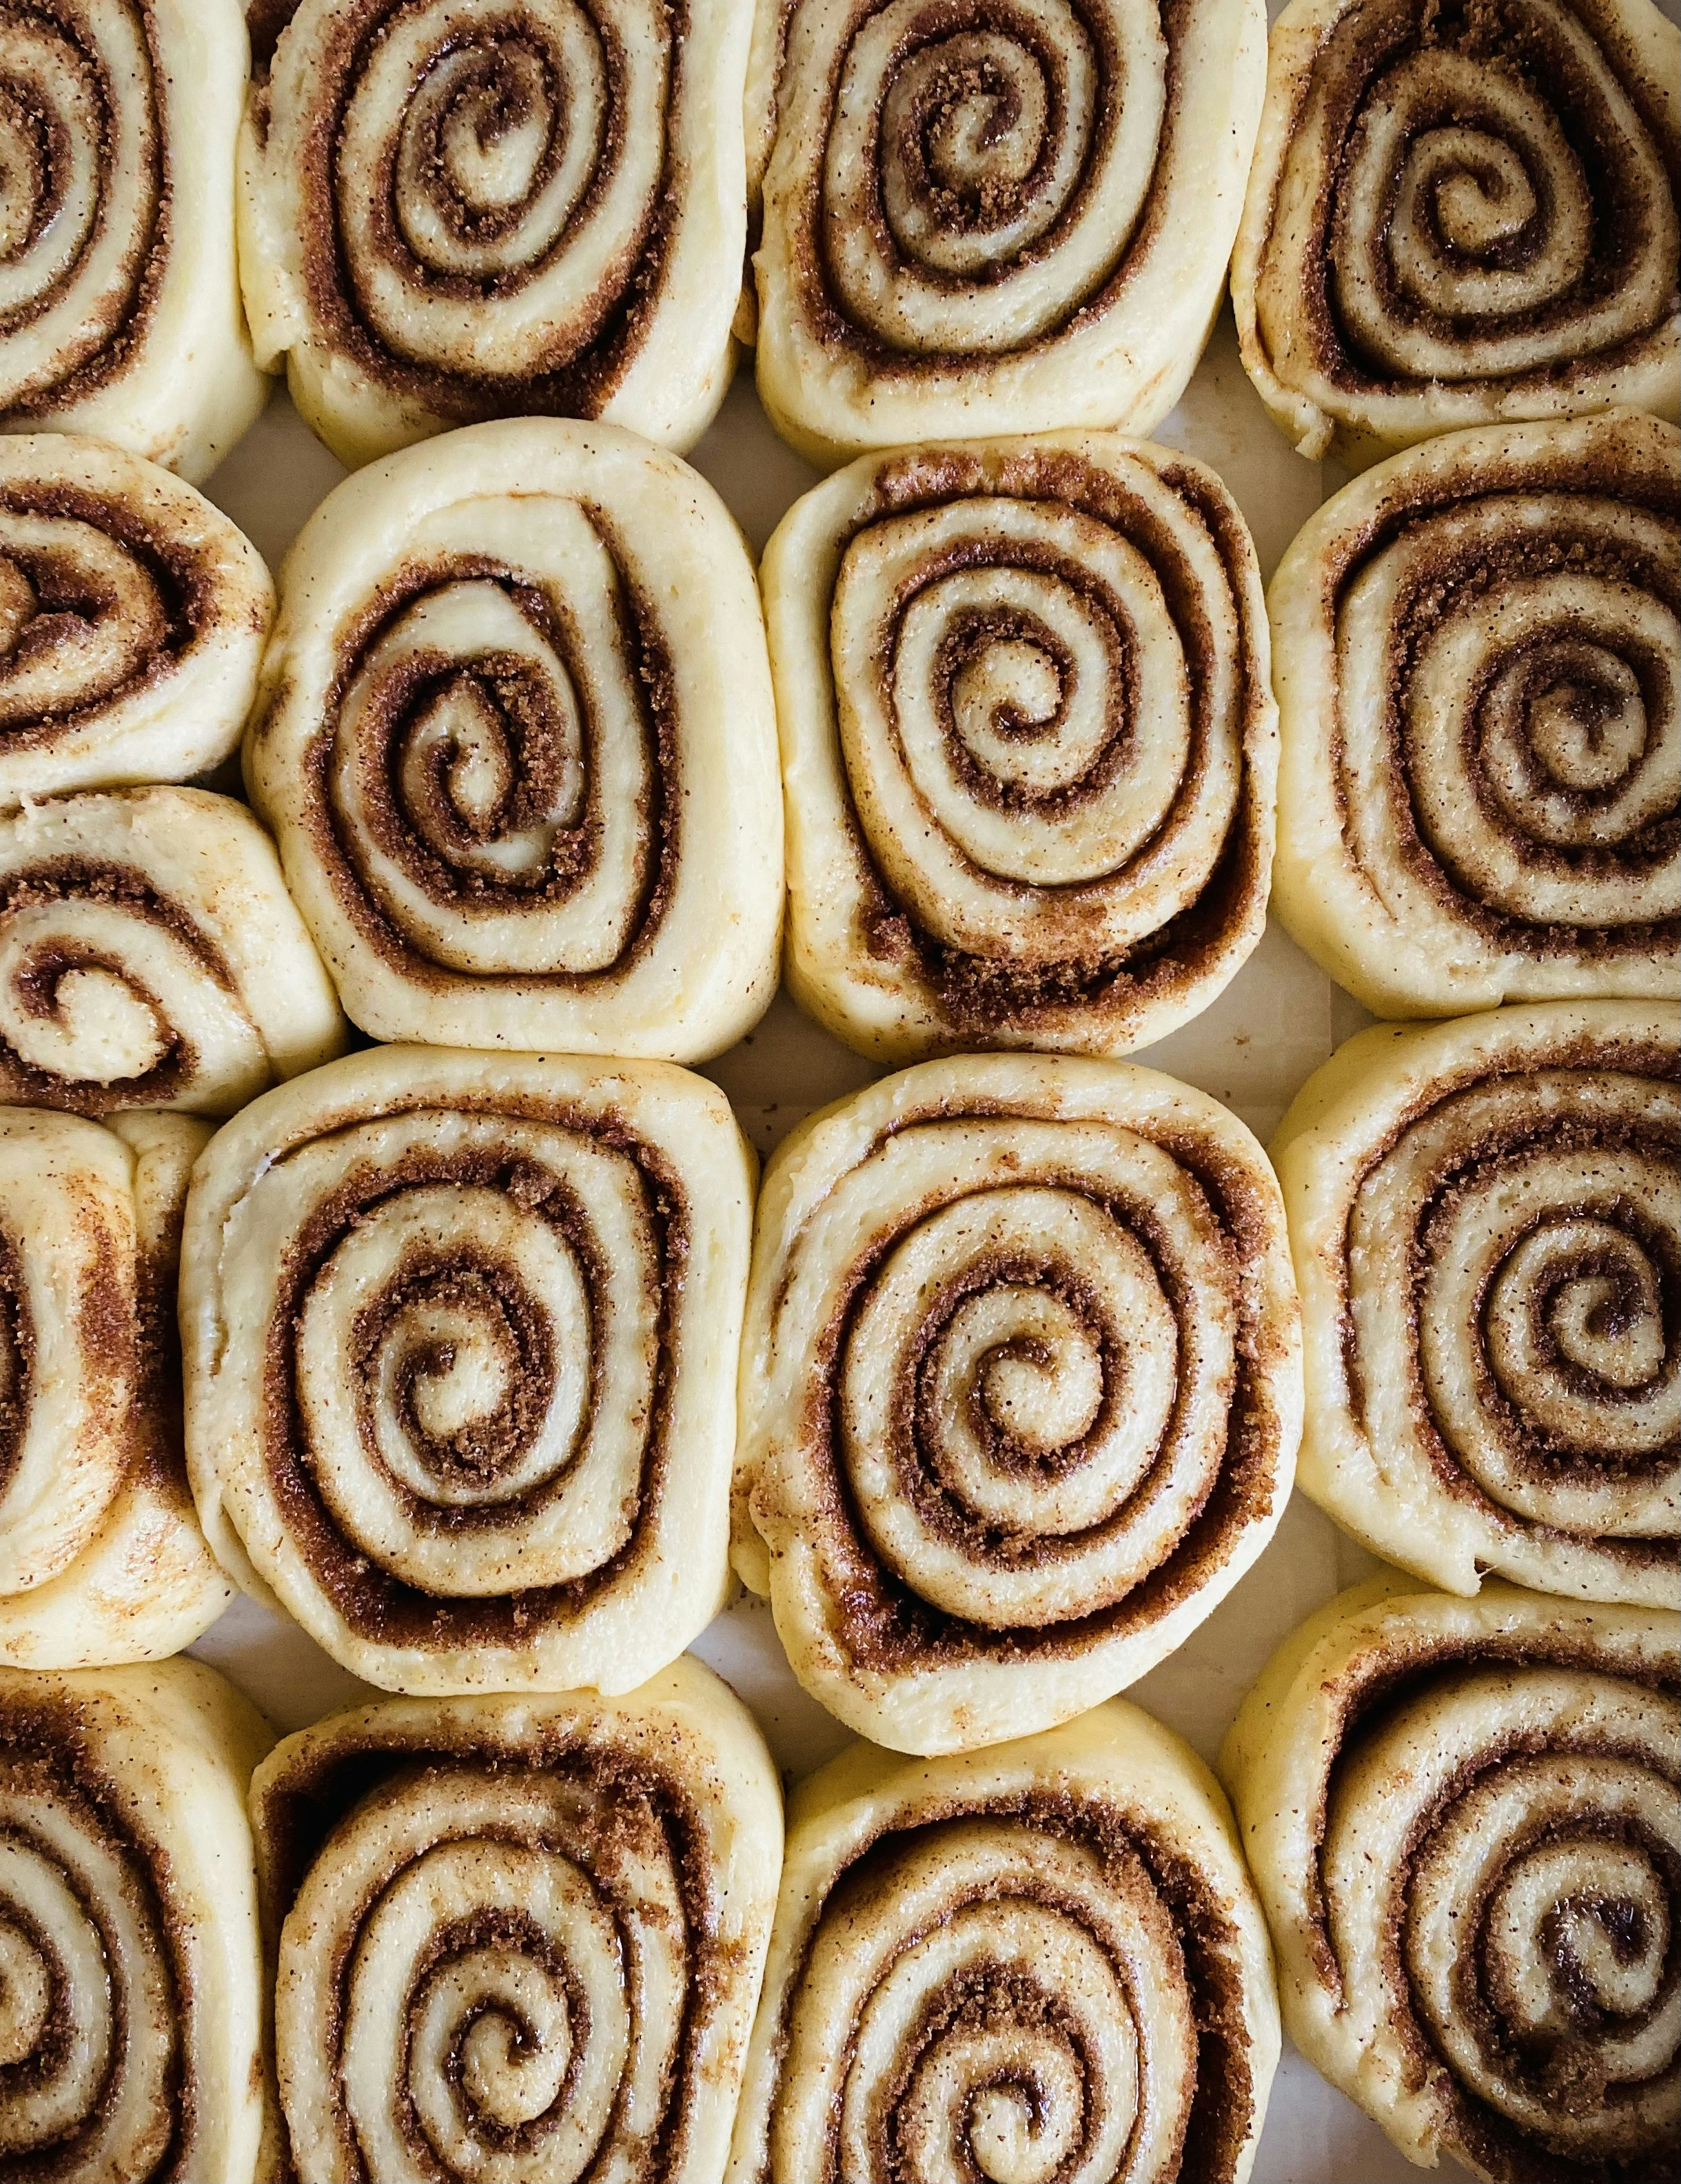 Unedited, unfiltered, original iPhone photo of made-from-scratch with Mom cinnamon rolls ready to be baked near Cleveland, Ohio